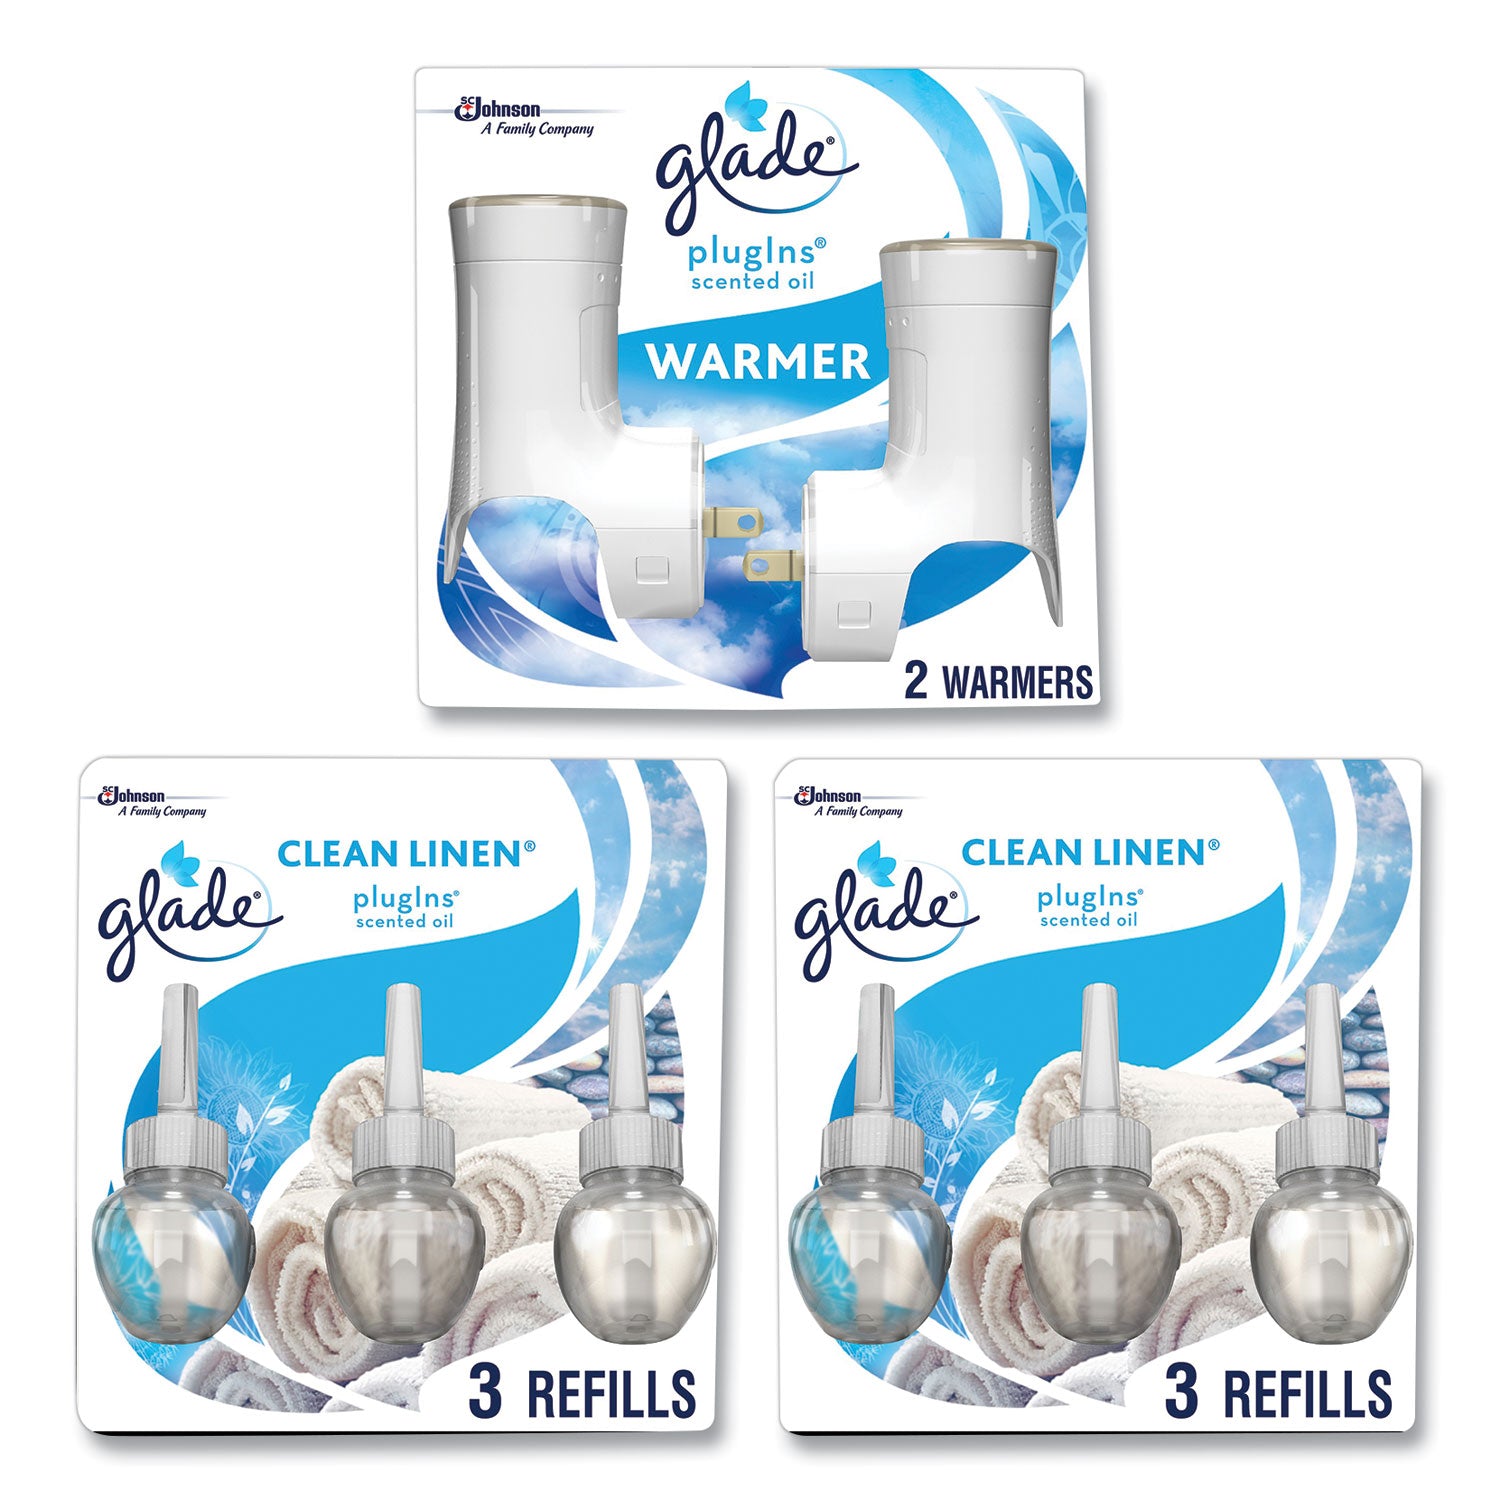 plugin-scented-oil-clean-linen-067-oz-2-warmers-and-6-refills-pack_sjn319963 - 1